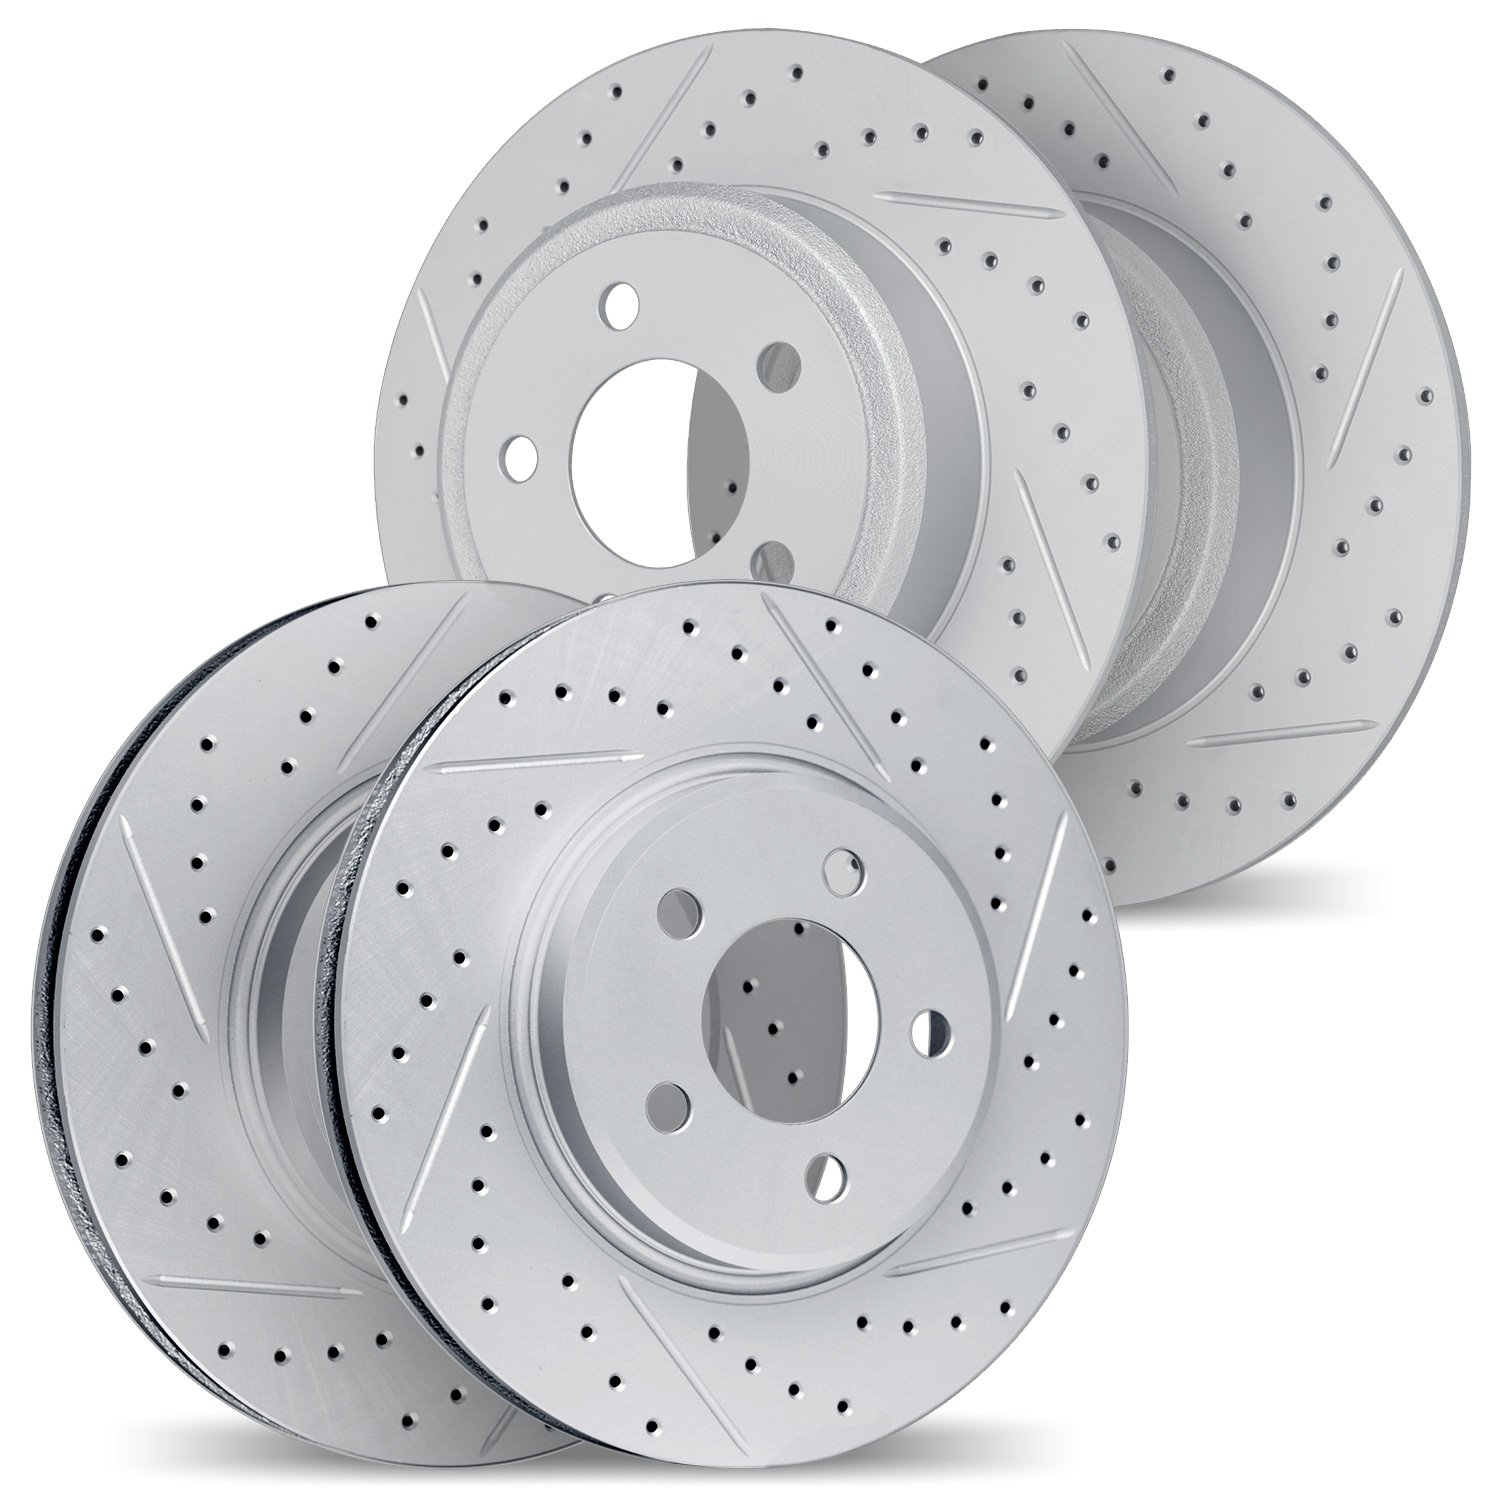 2004-75026 Geoperformance Drilled/Slotted Brake Rotors, 2018-2018 Lexus/Toyota/Scion, Position: Front and Rear